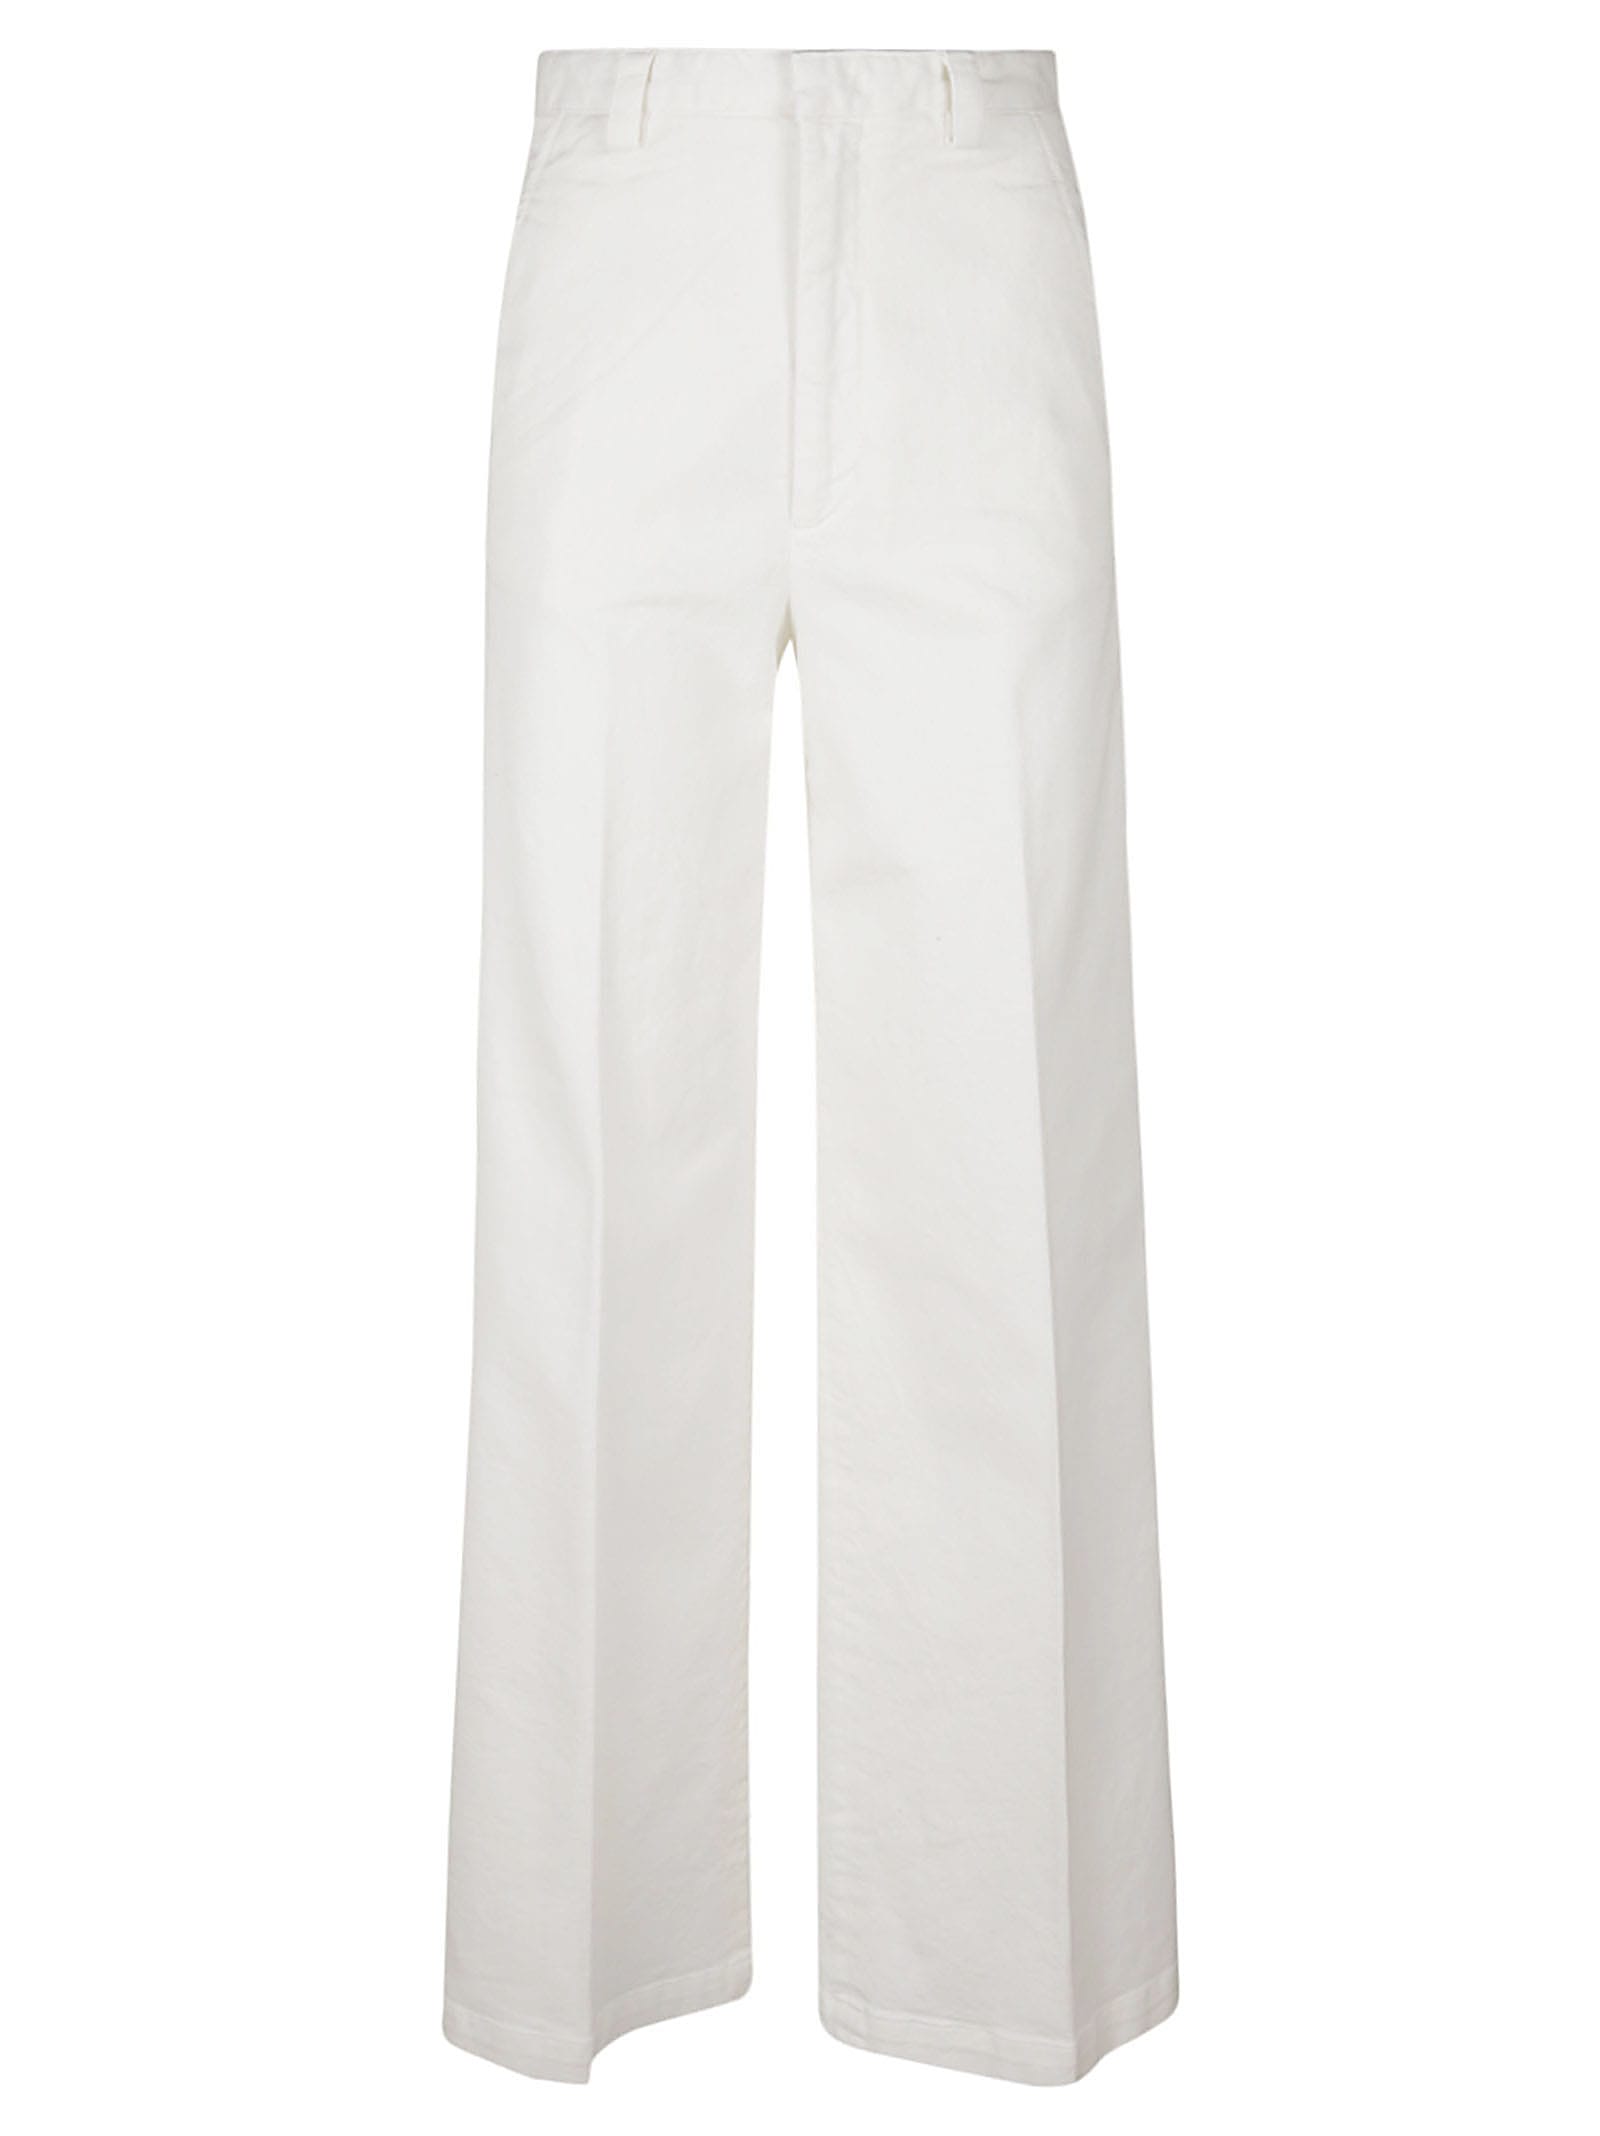 RED Valentino Wide Leg Plain Trousers